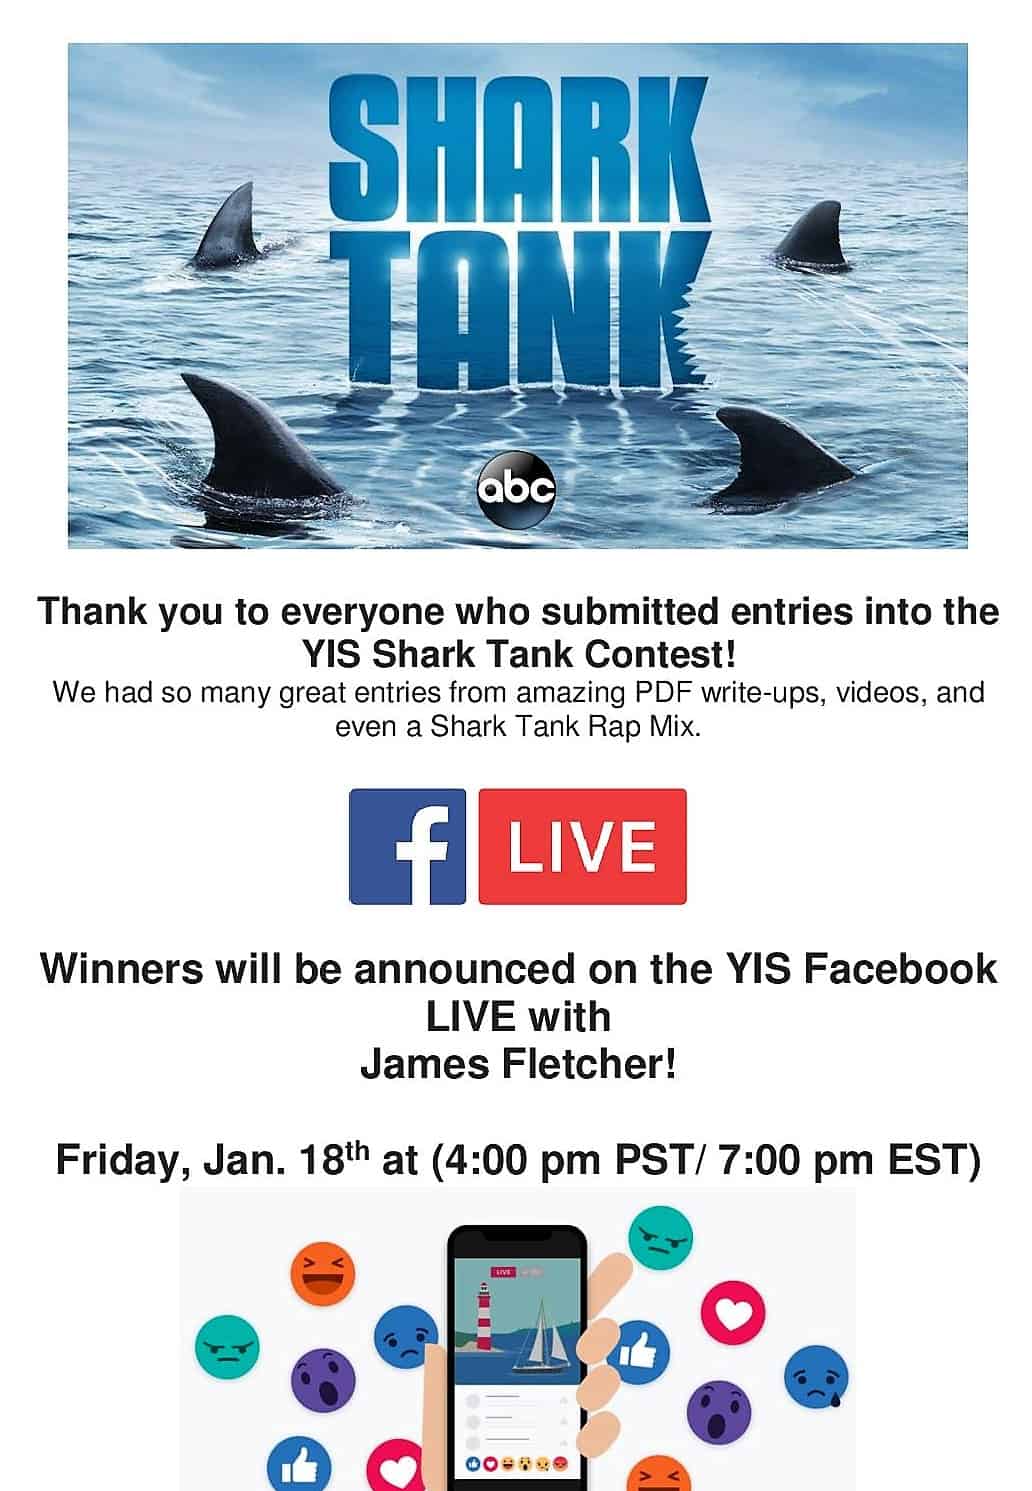 Shark Tank Winners will be Announced on Facebook LIVE 1/18 4:00 pm PST